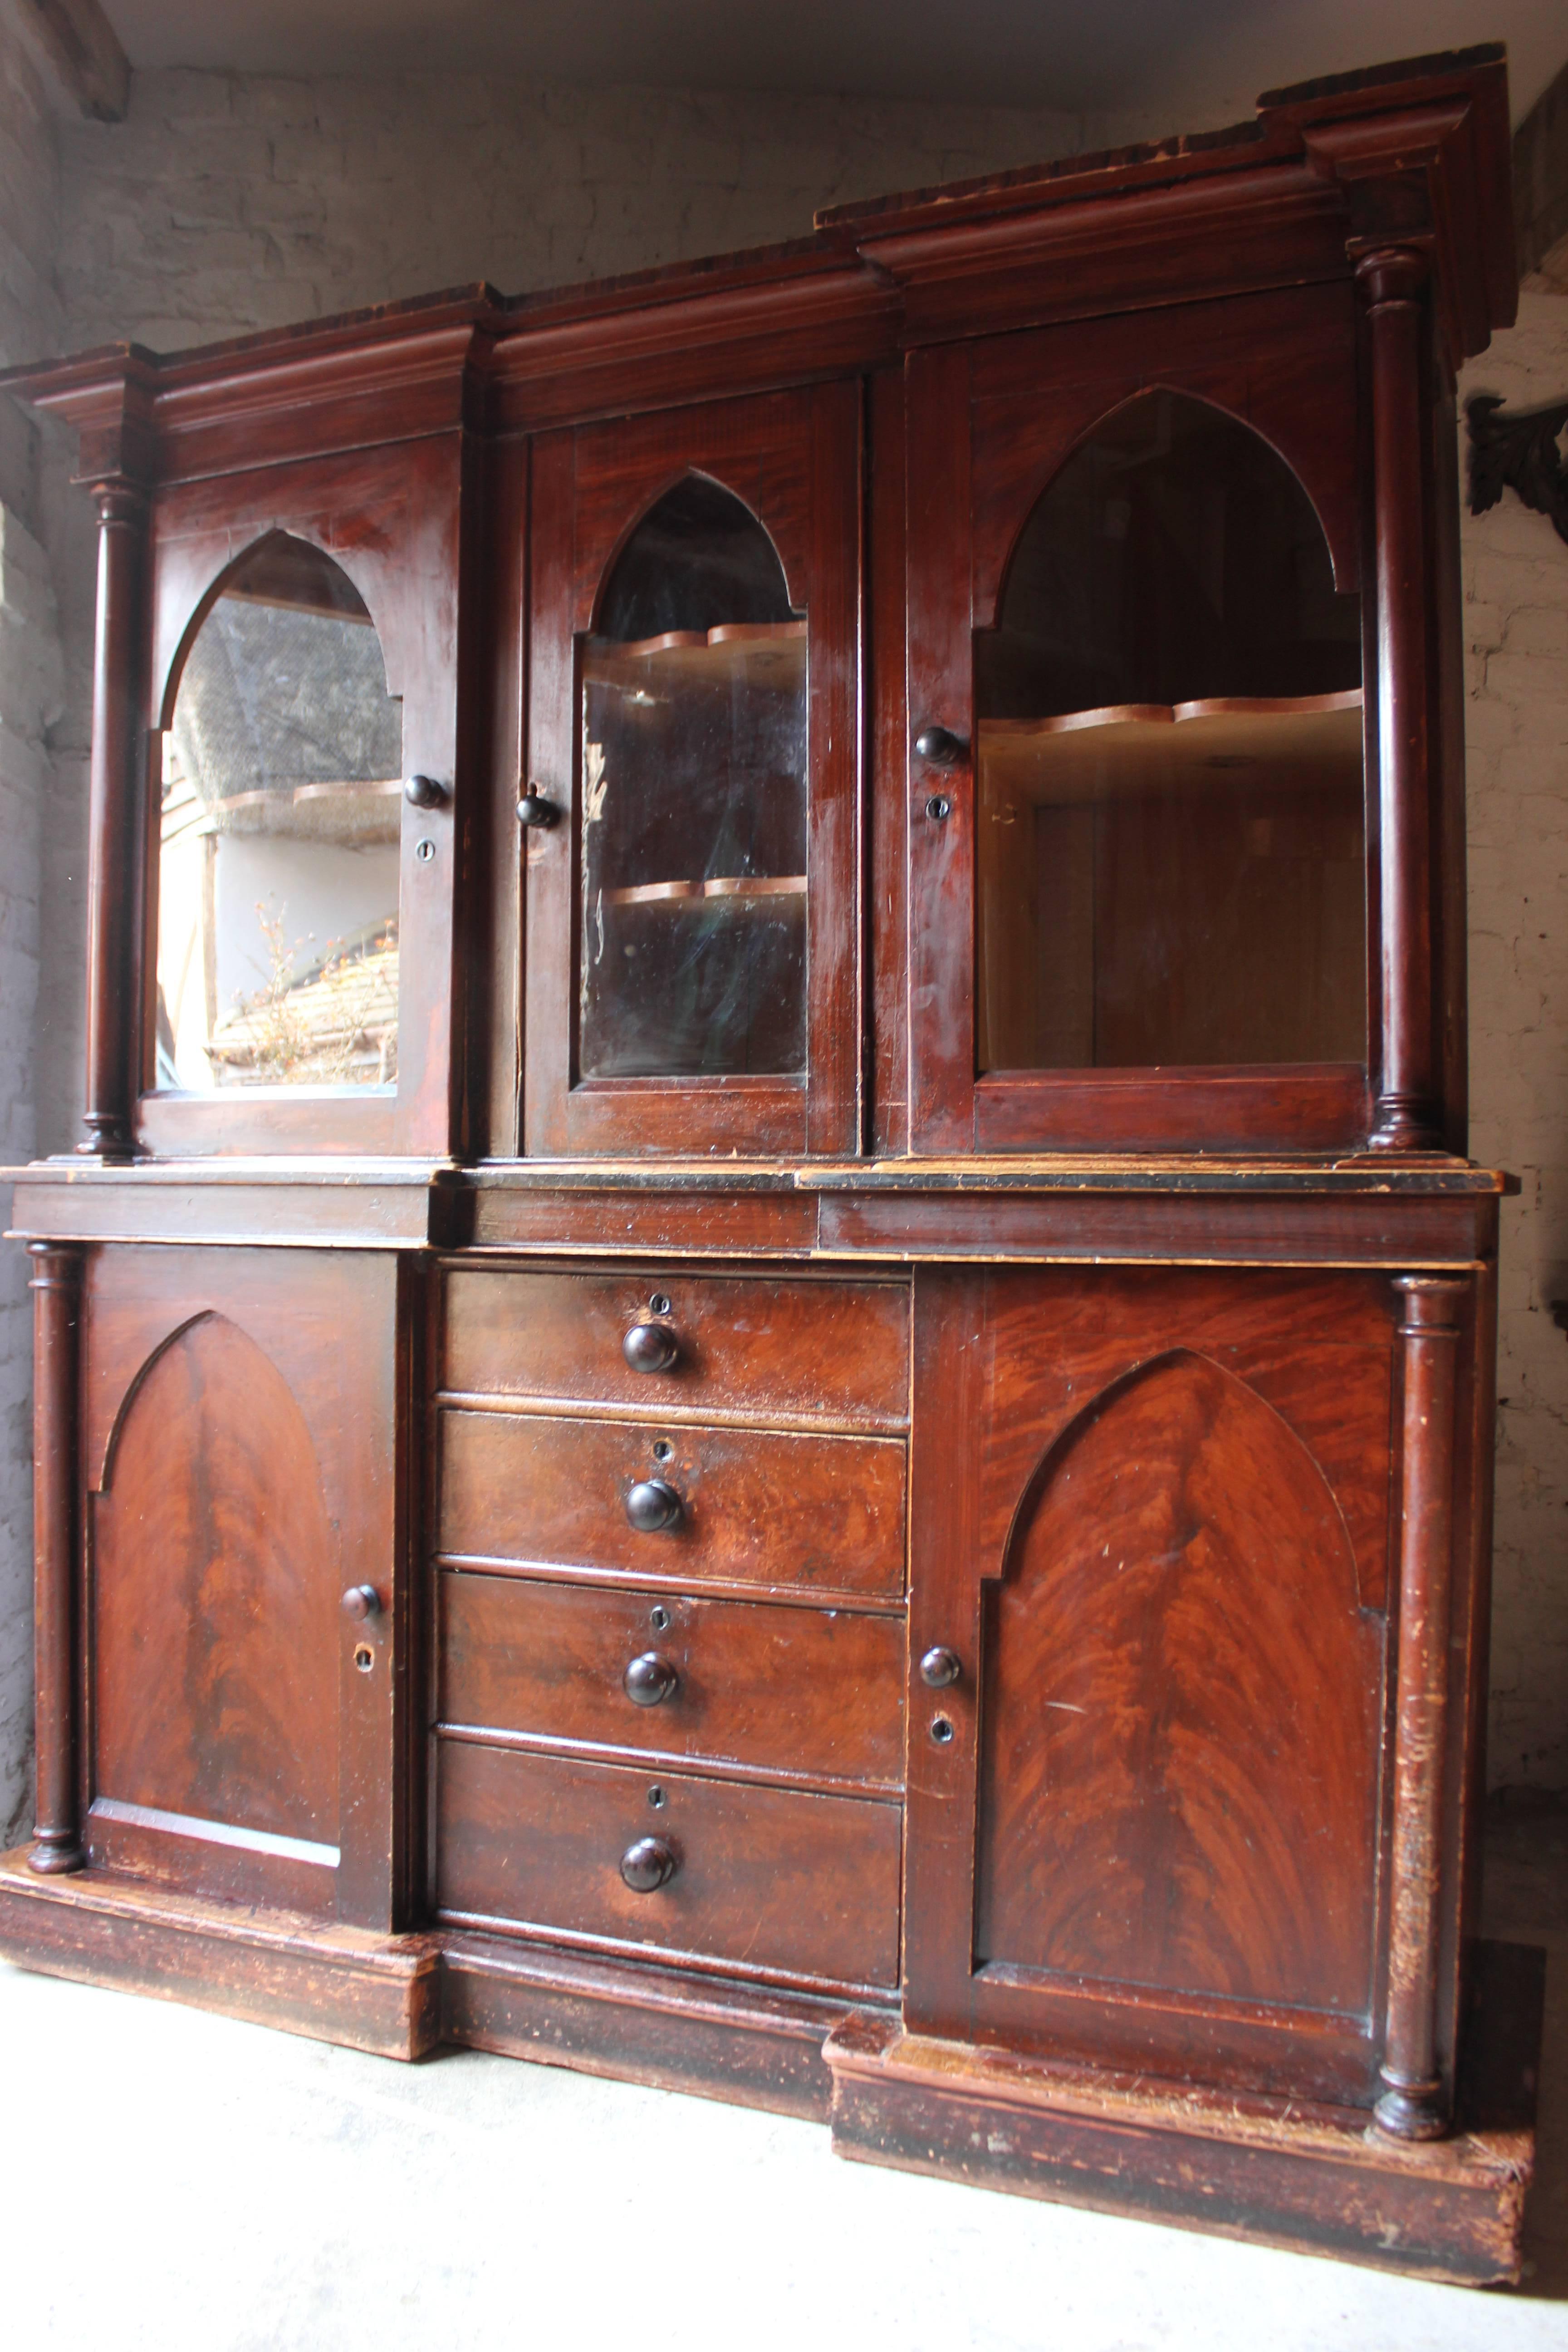 The handsome Provincial Gothic revival inverted breakfront bookcase, cupboard or cabinet, stained pine to simulate plum pudding mahogany, breaking down into three sections, the whole on a plinth base with pilasters to each flank and a stepped